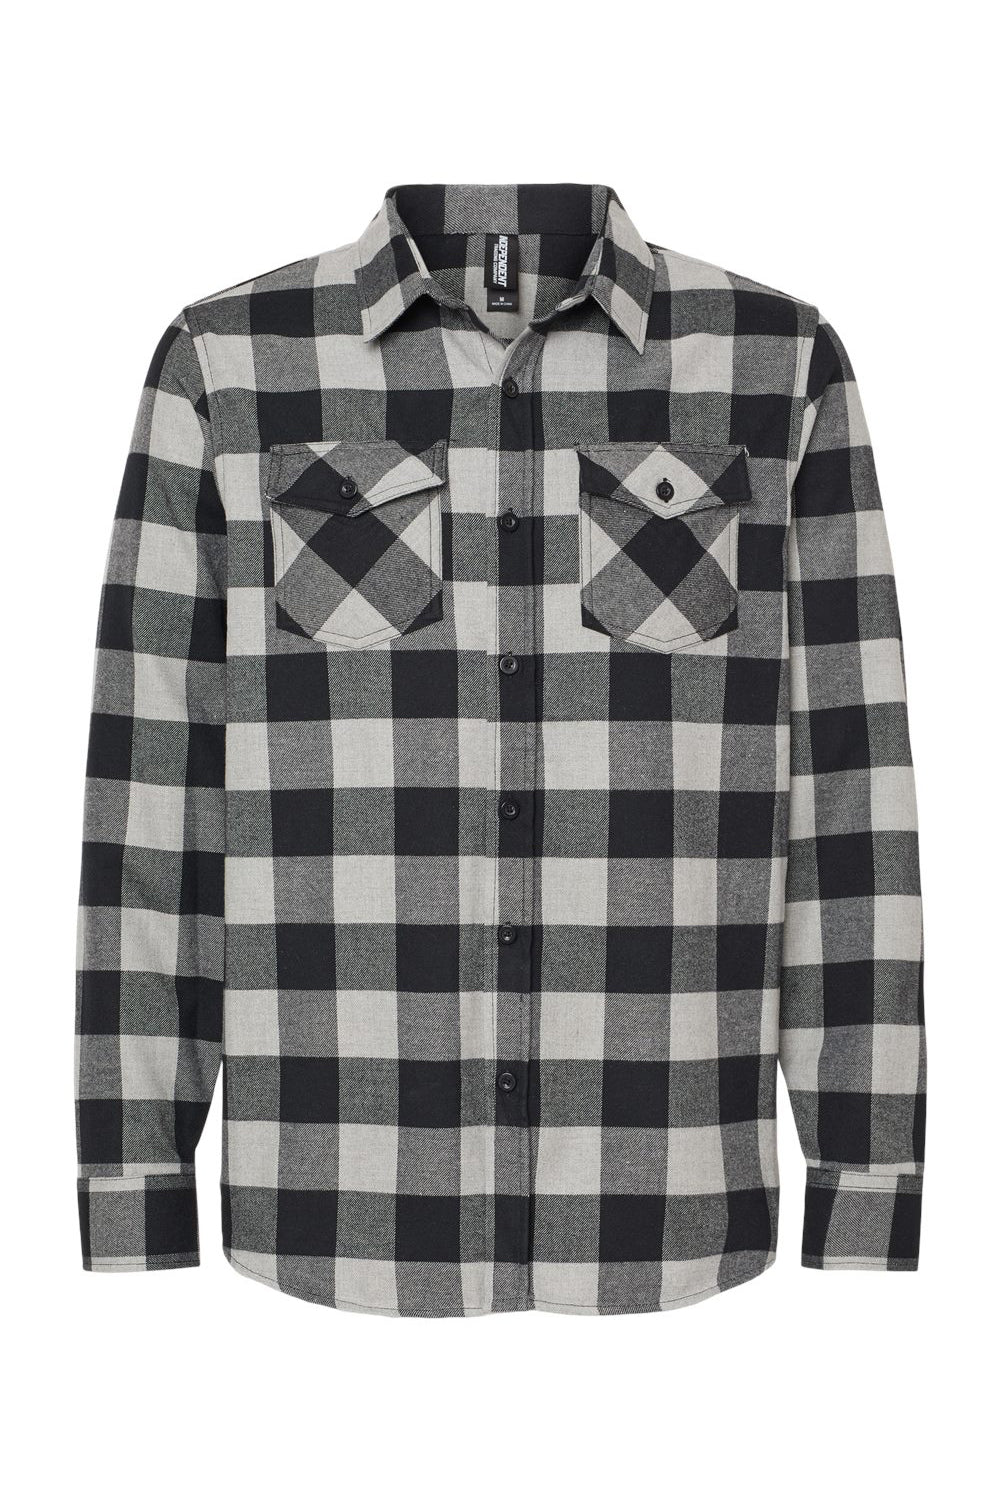 Independent Trading Co. EXP50F Mens Long Sleeve Button Down Flannel Shirt w/ Double Pockets Heather Grey/Black Flat Front